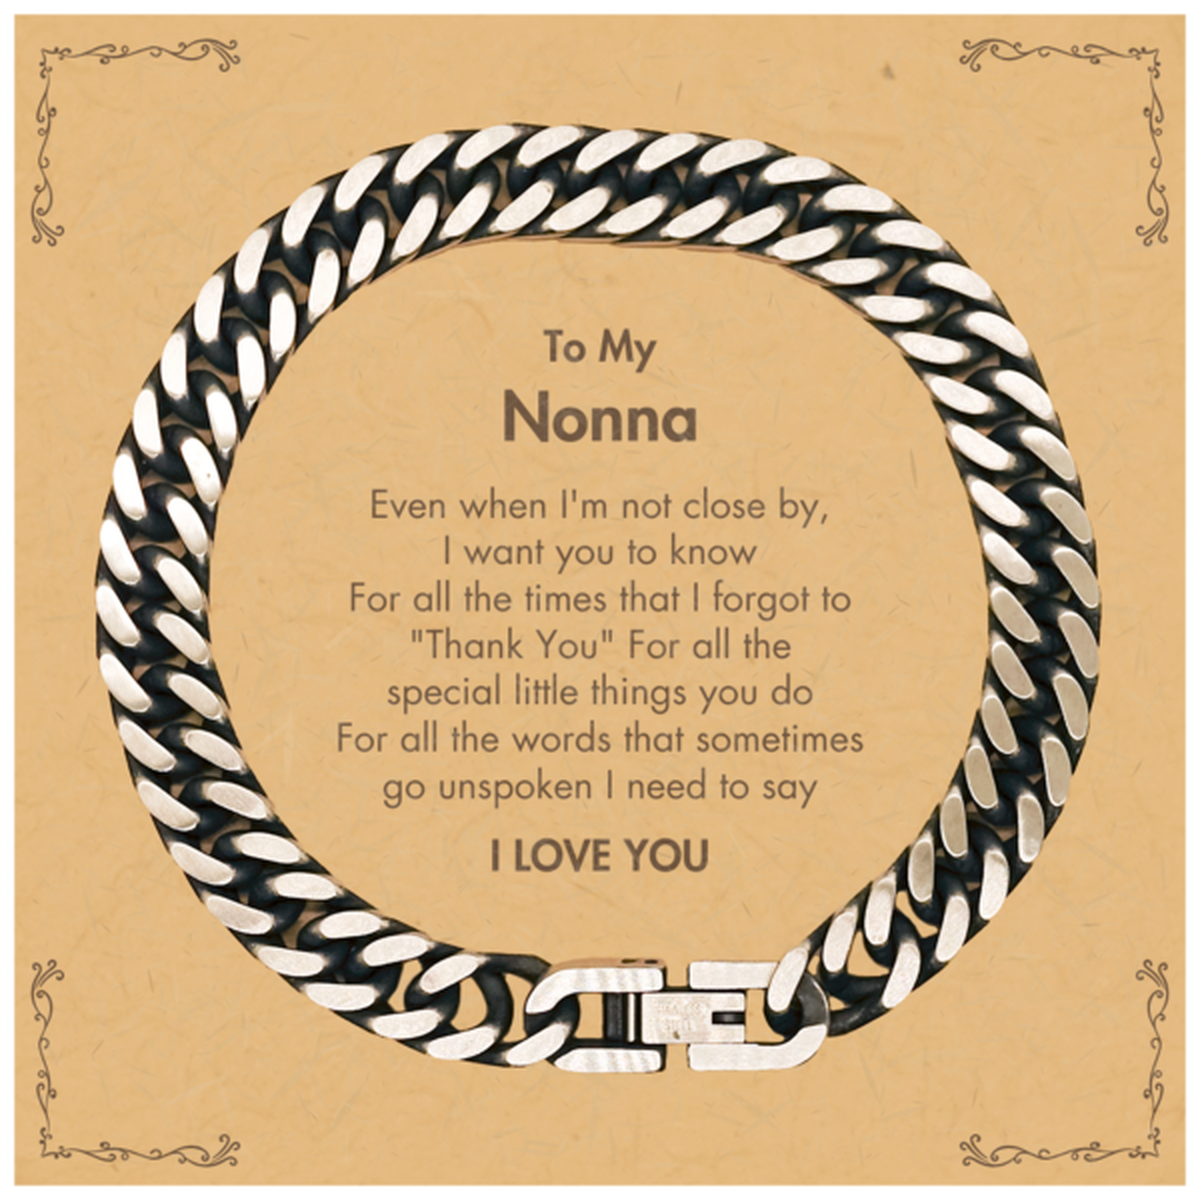 Thank You Gifts for Nonna, Keepsake Cuban Link Chain Bracelet Gifts for Nonna Birthday Mother's day Father's Day Nonna For all the words That sometimes go unspoken I need to say I LOVE YOU